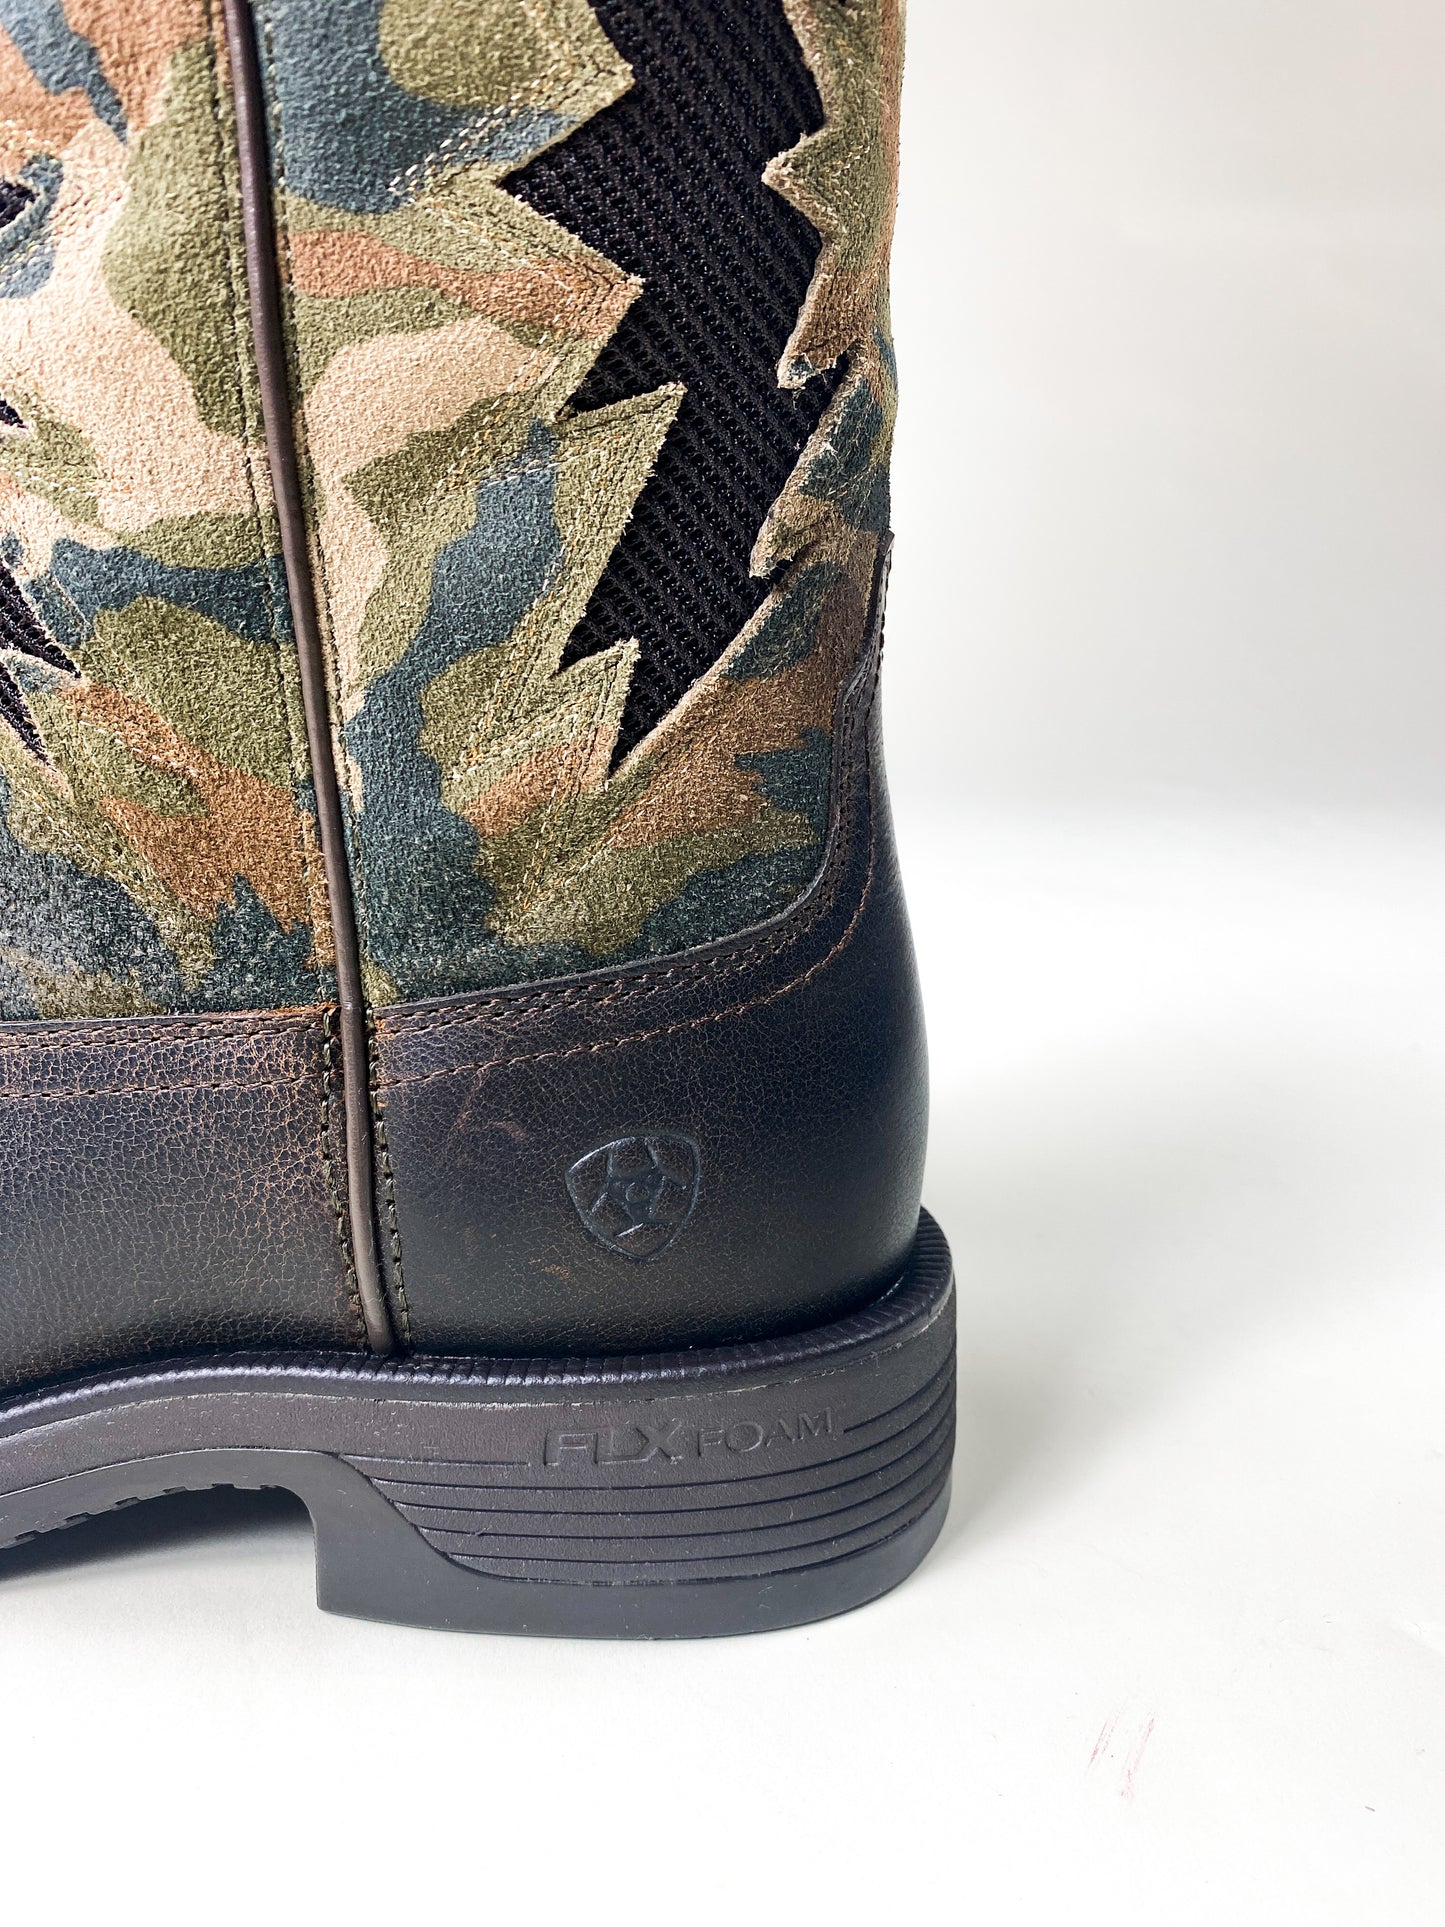 Ariat Casually Camo Rich Brown Ridgeback VentTEK Wide Square Boots